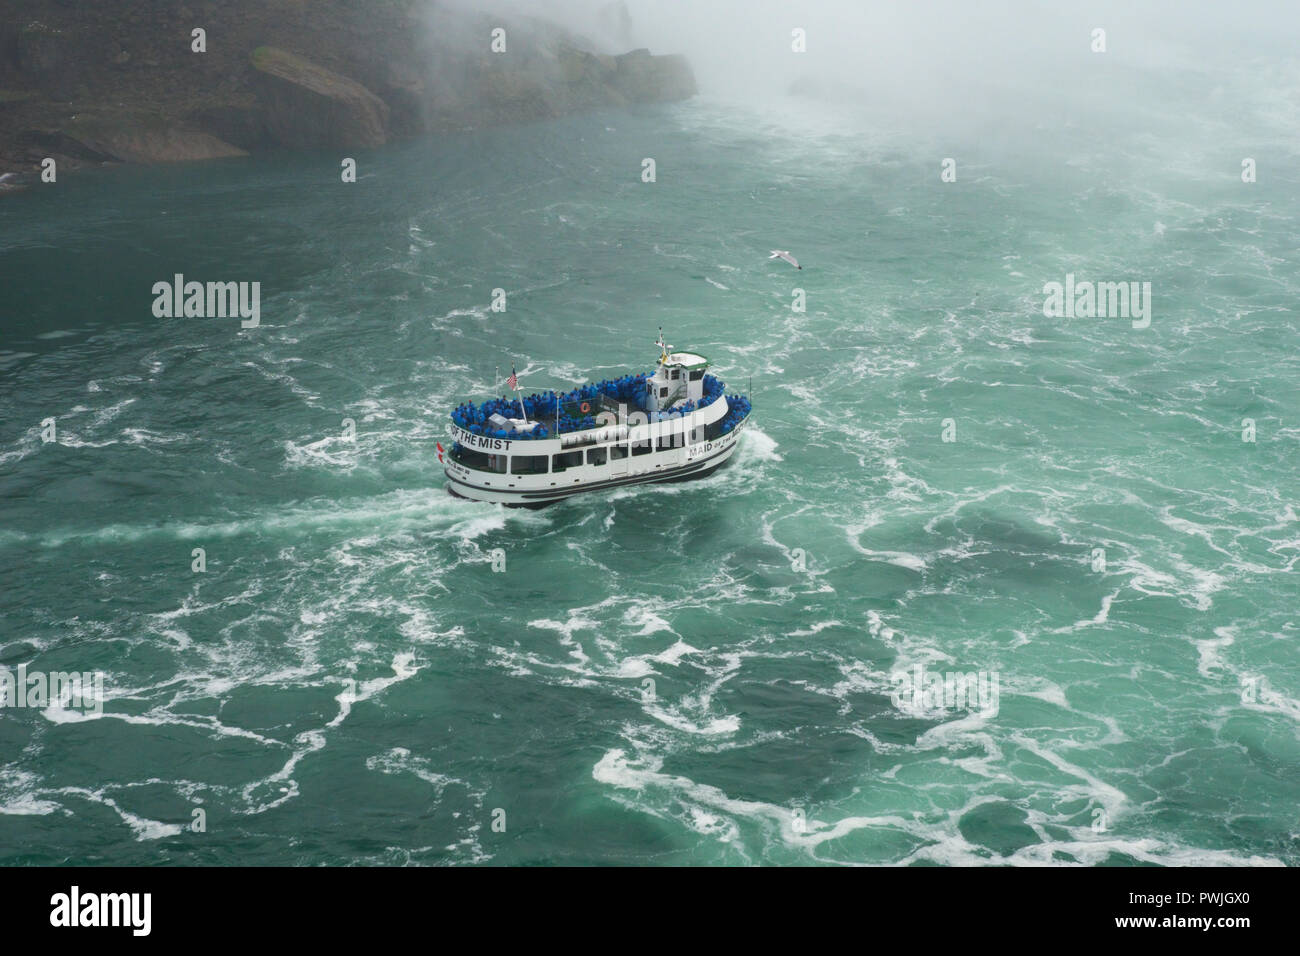 NIAGARA FALLS, ONTARIO, CANADA - MAY 21st 2018: The Maid of the Mist cruise ferry transports tourists through the mist on the wild waters at Niagara Falls Stock Photo